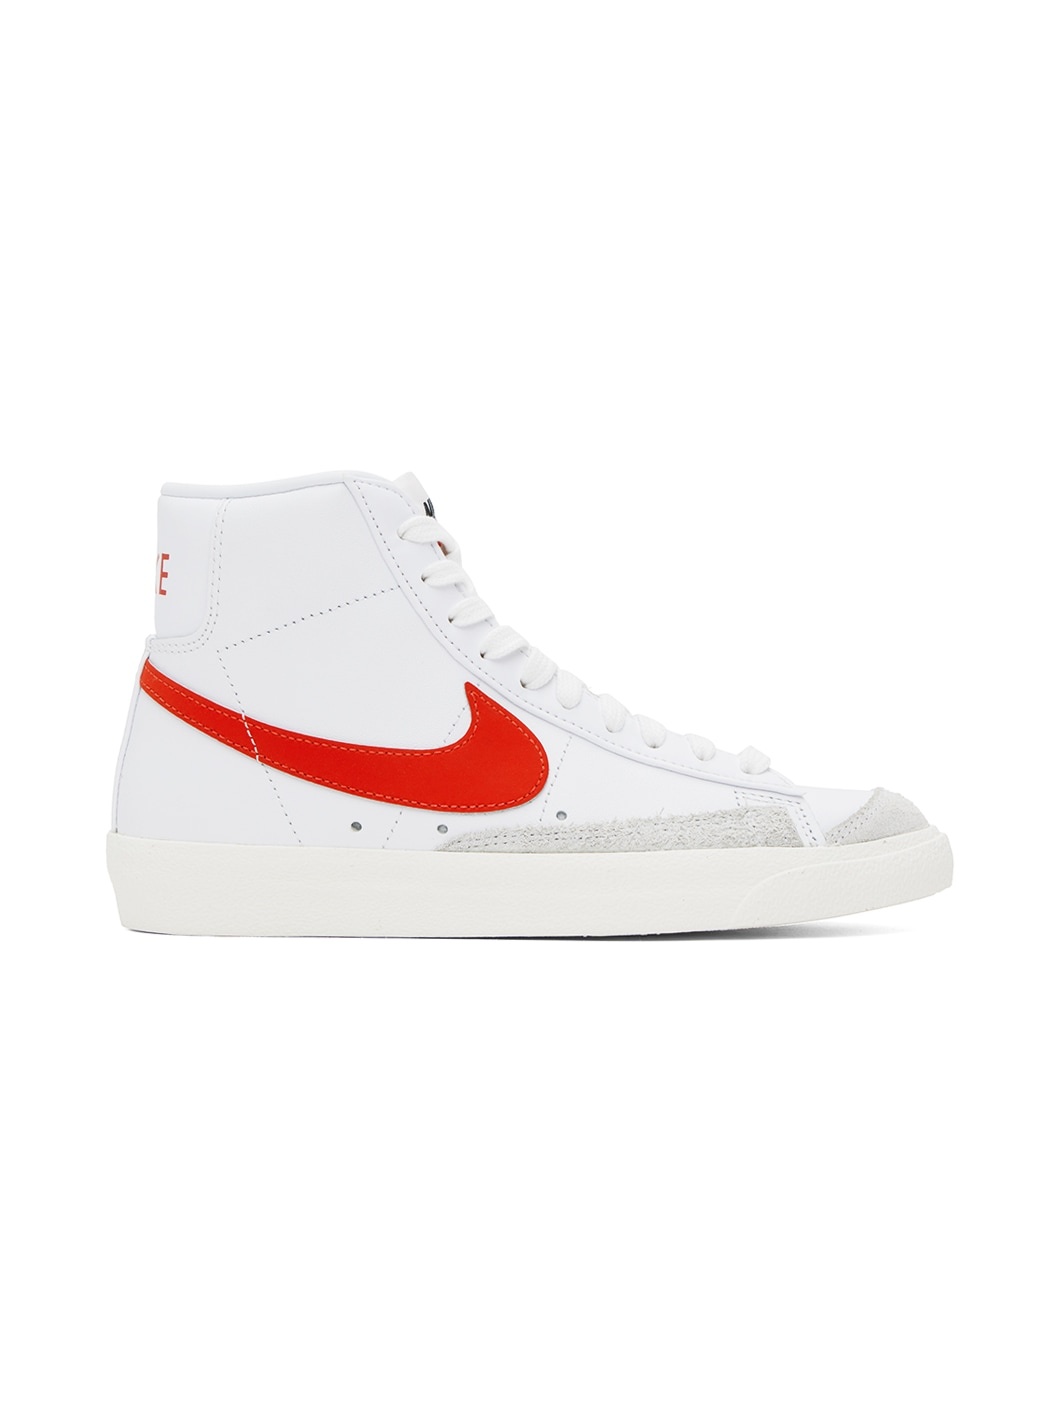 White & Red Blazer Mid '77 Sneakers - 1